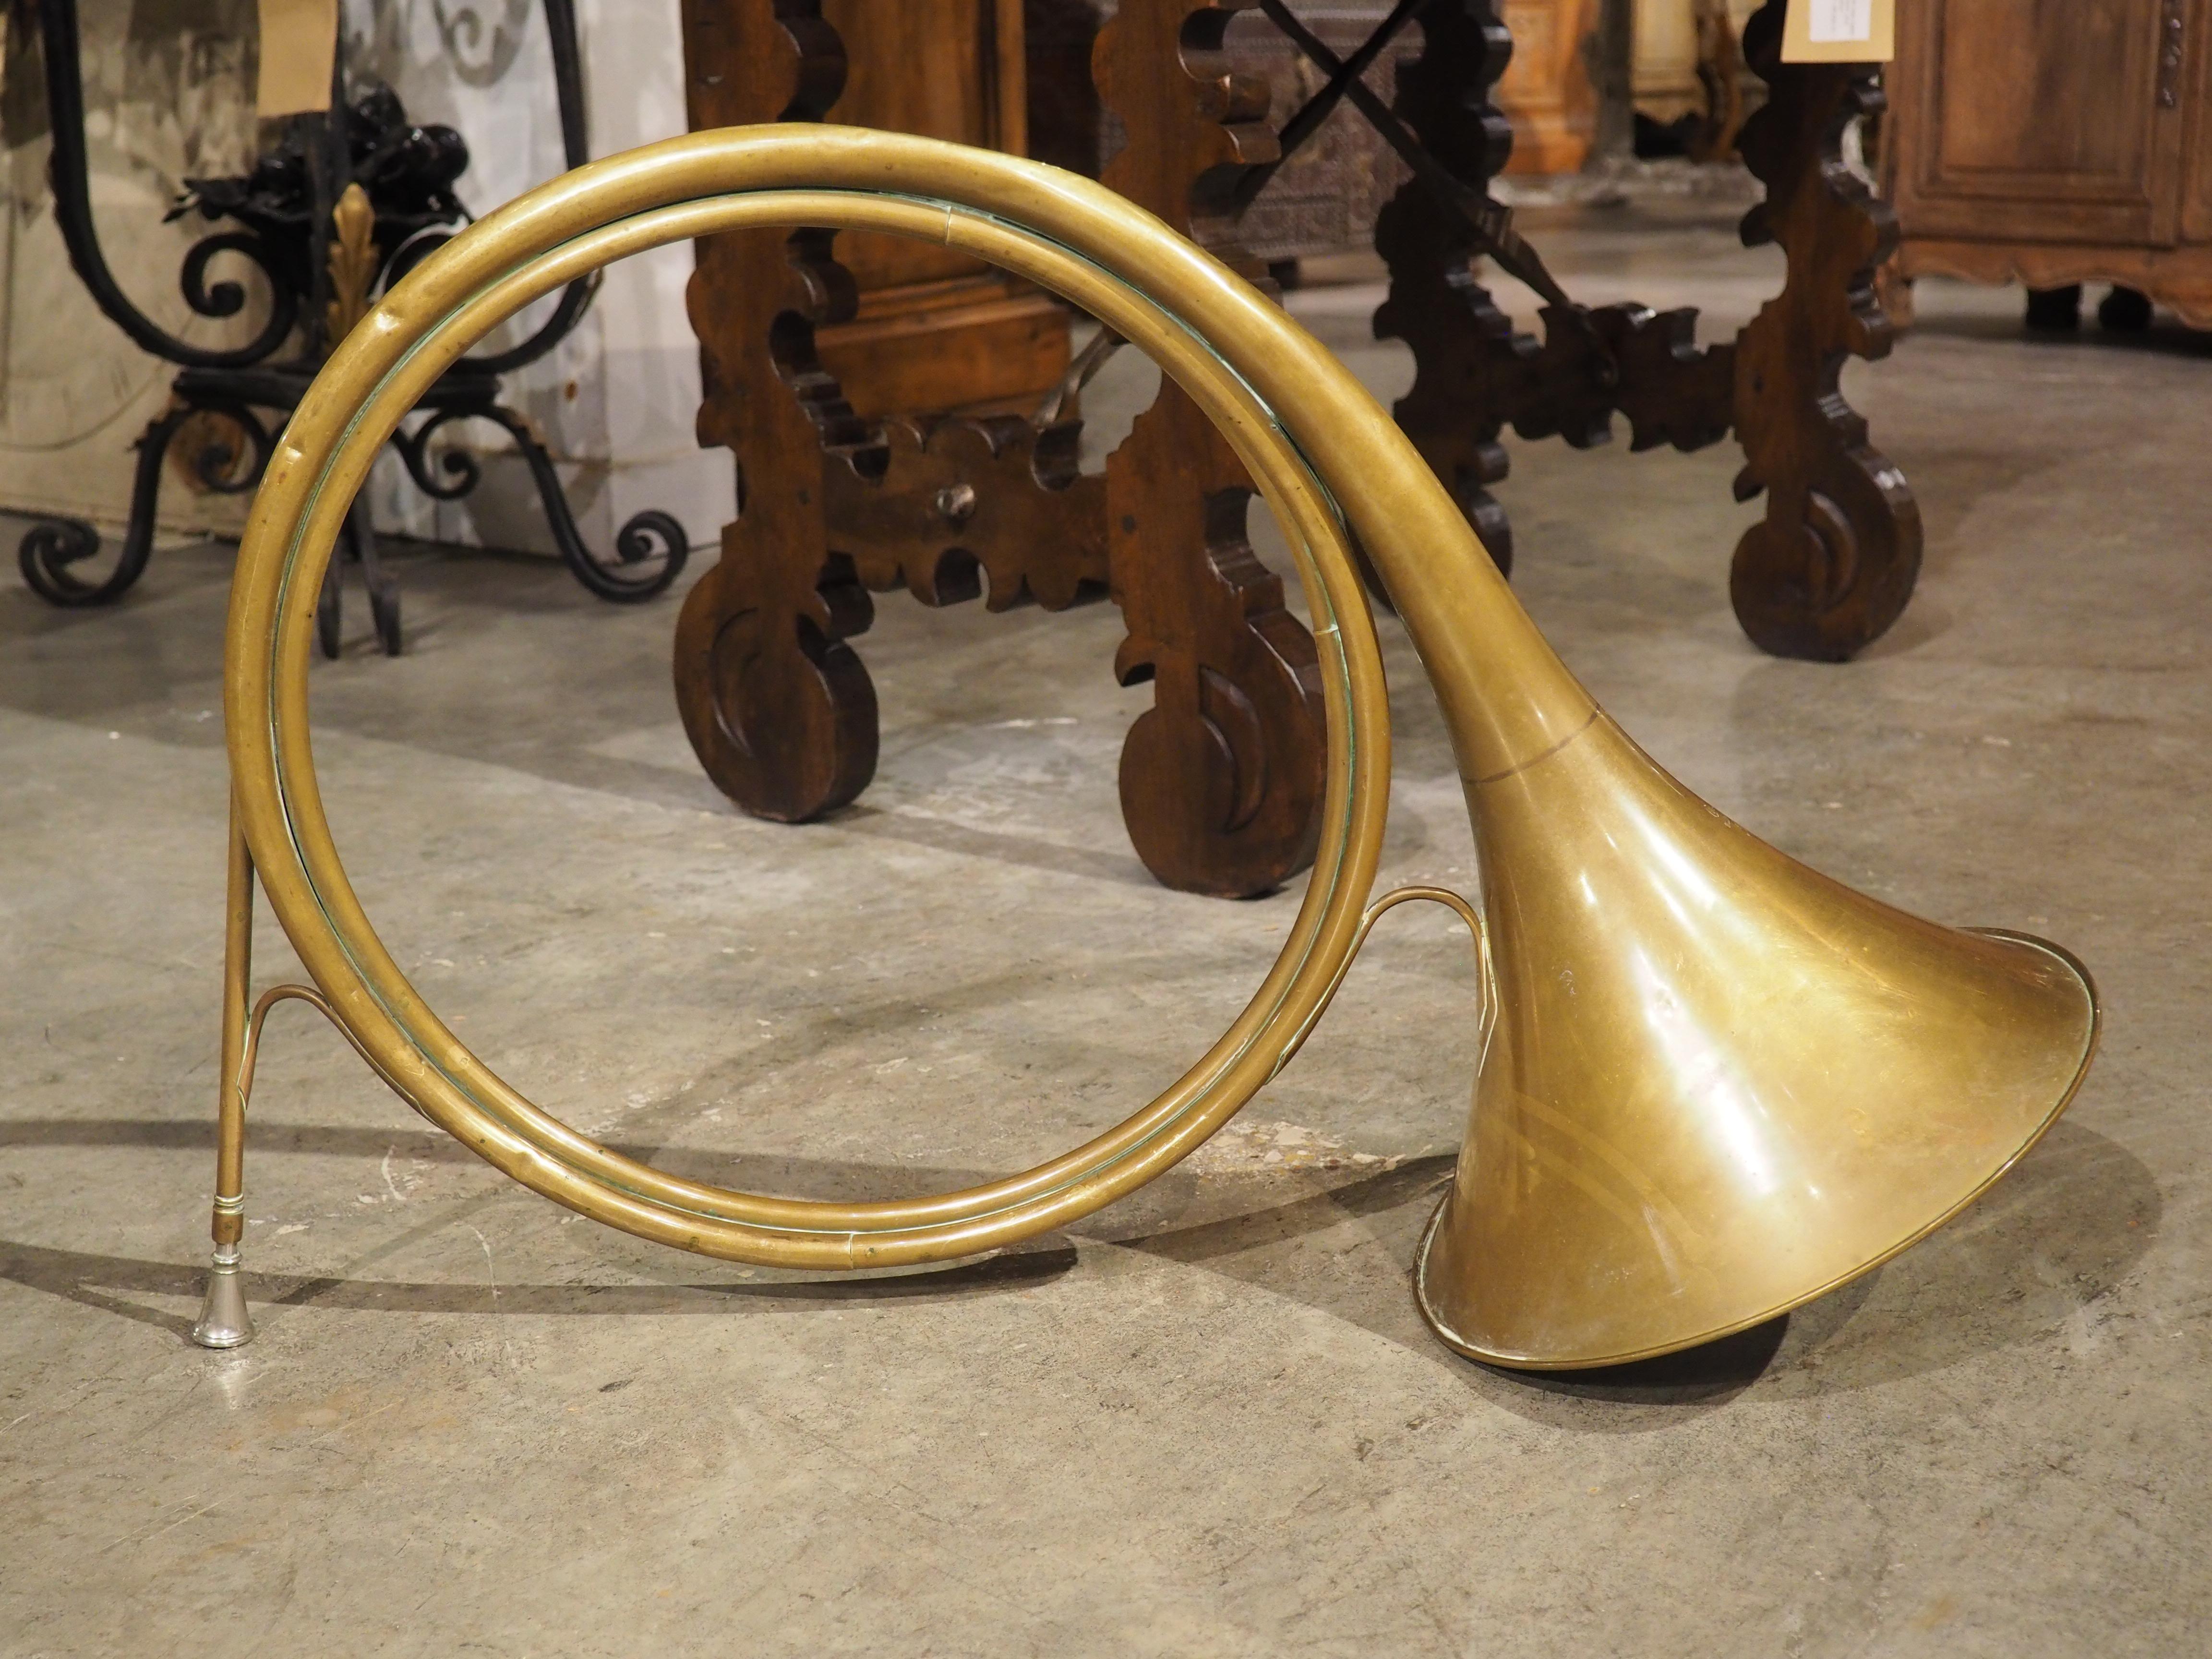 An ancestor of modern orchestral horns, this le cor de chasse, or hunting horn, would have been carried by a member of a fox or stag hunting party known as the huntsman. Unlike orchestral horns, this brass version is valveless, relying on the skill